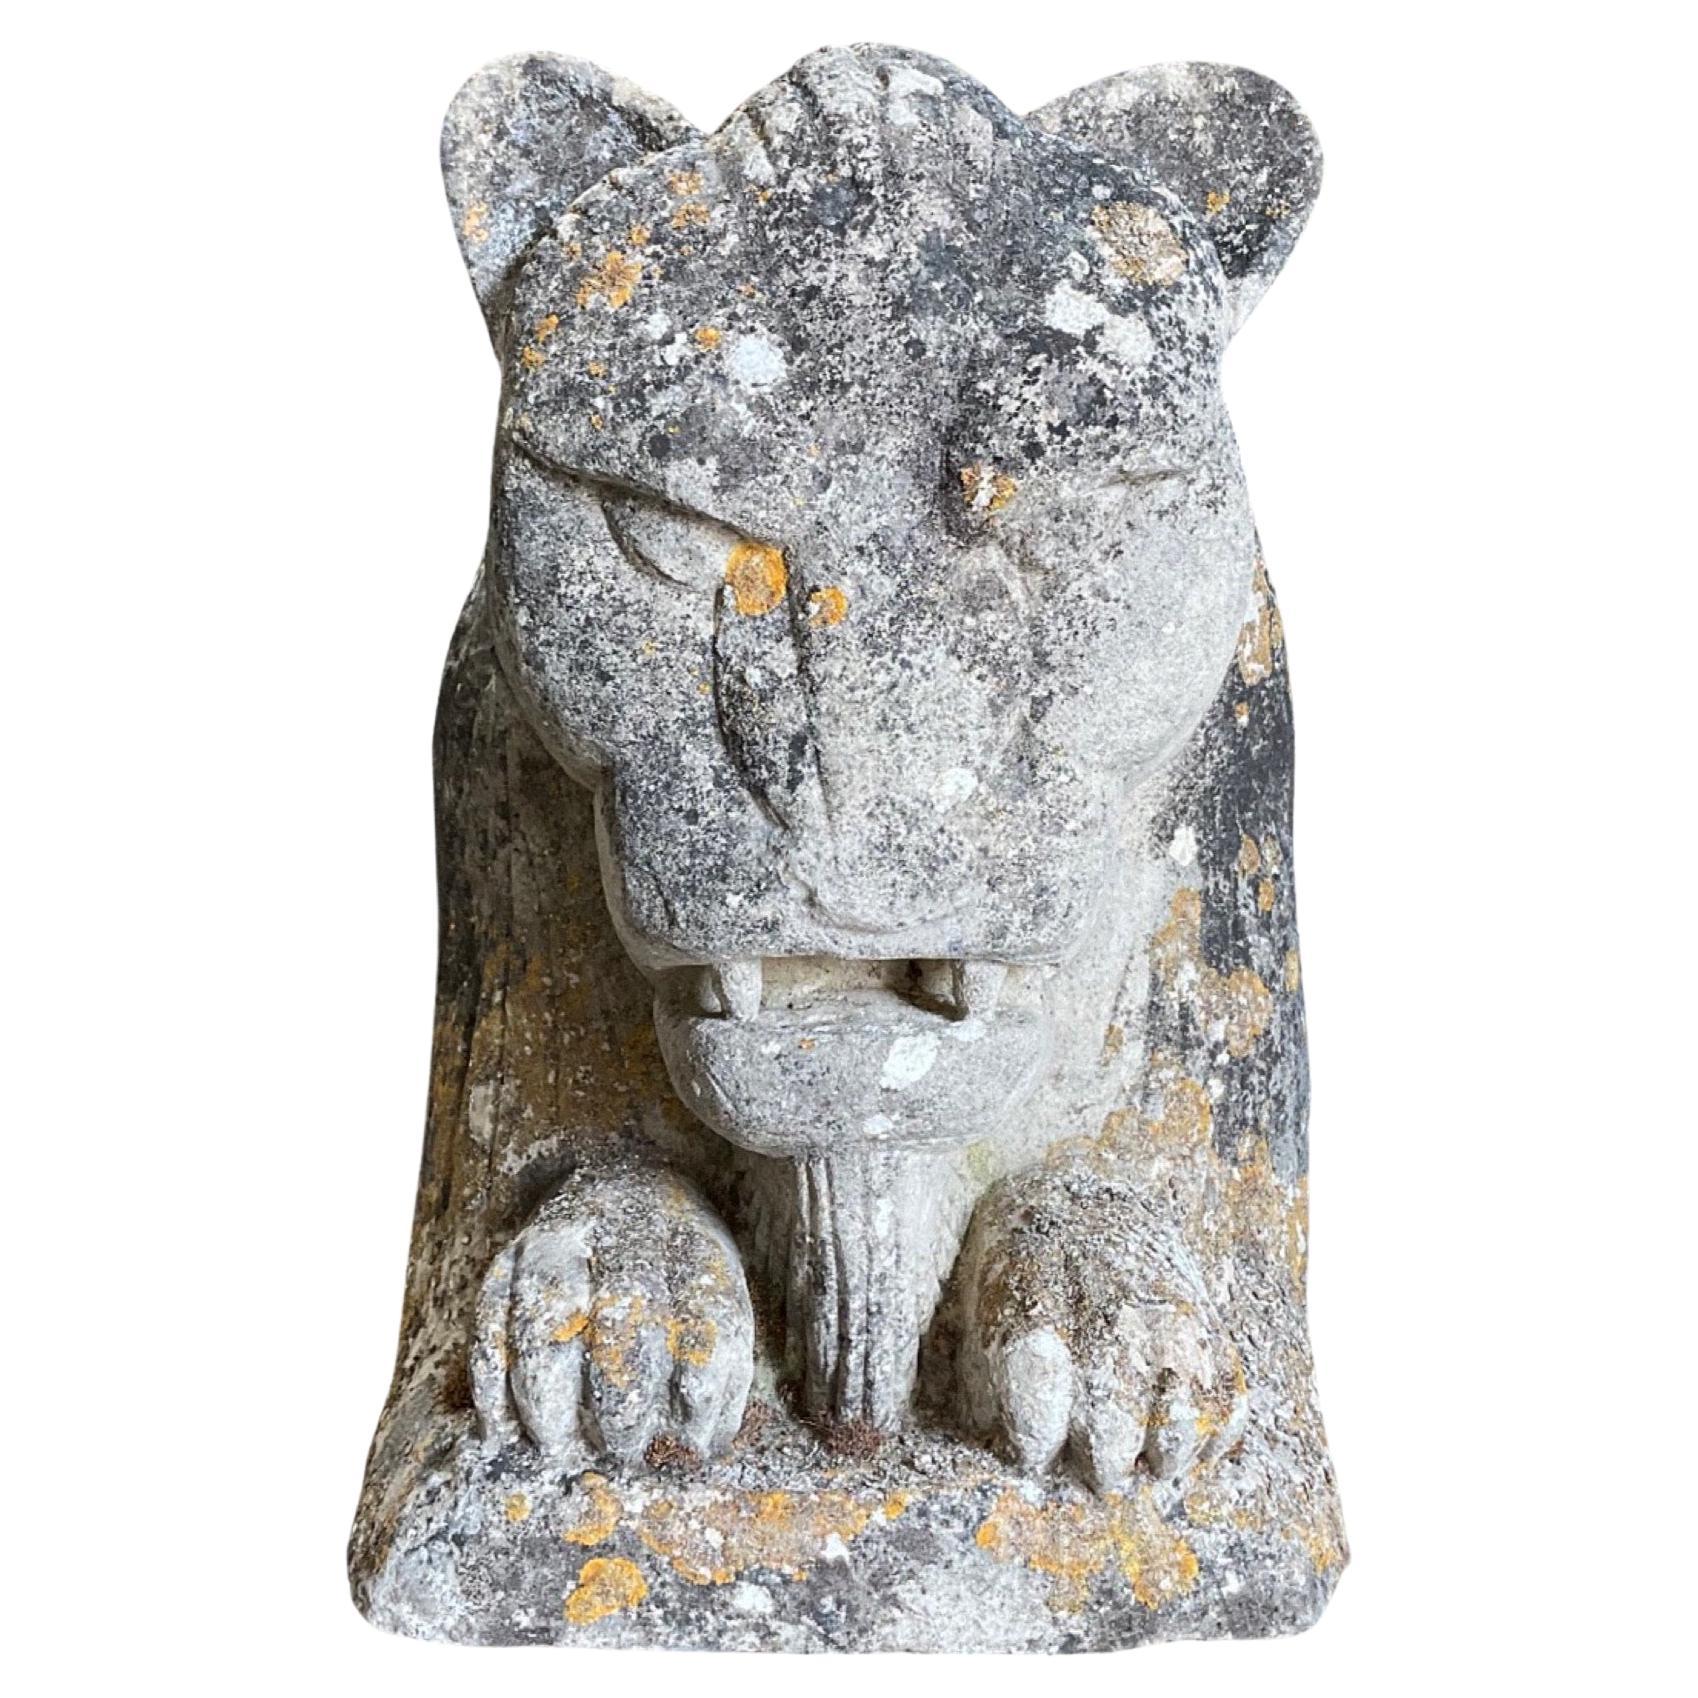 French Limestone Mythological Creature Sculpture For Sale